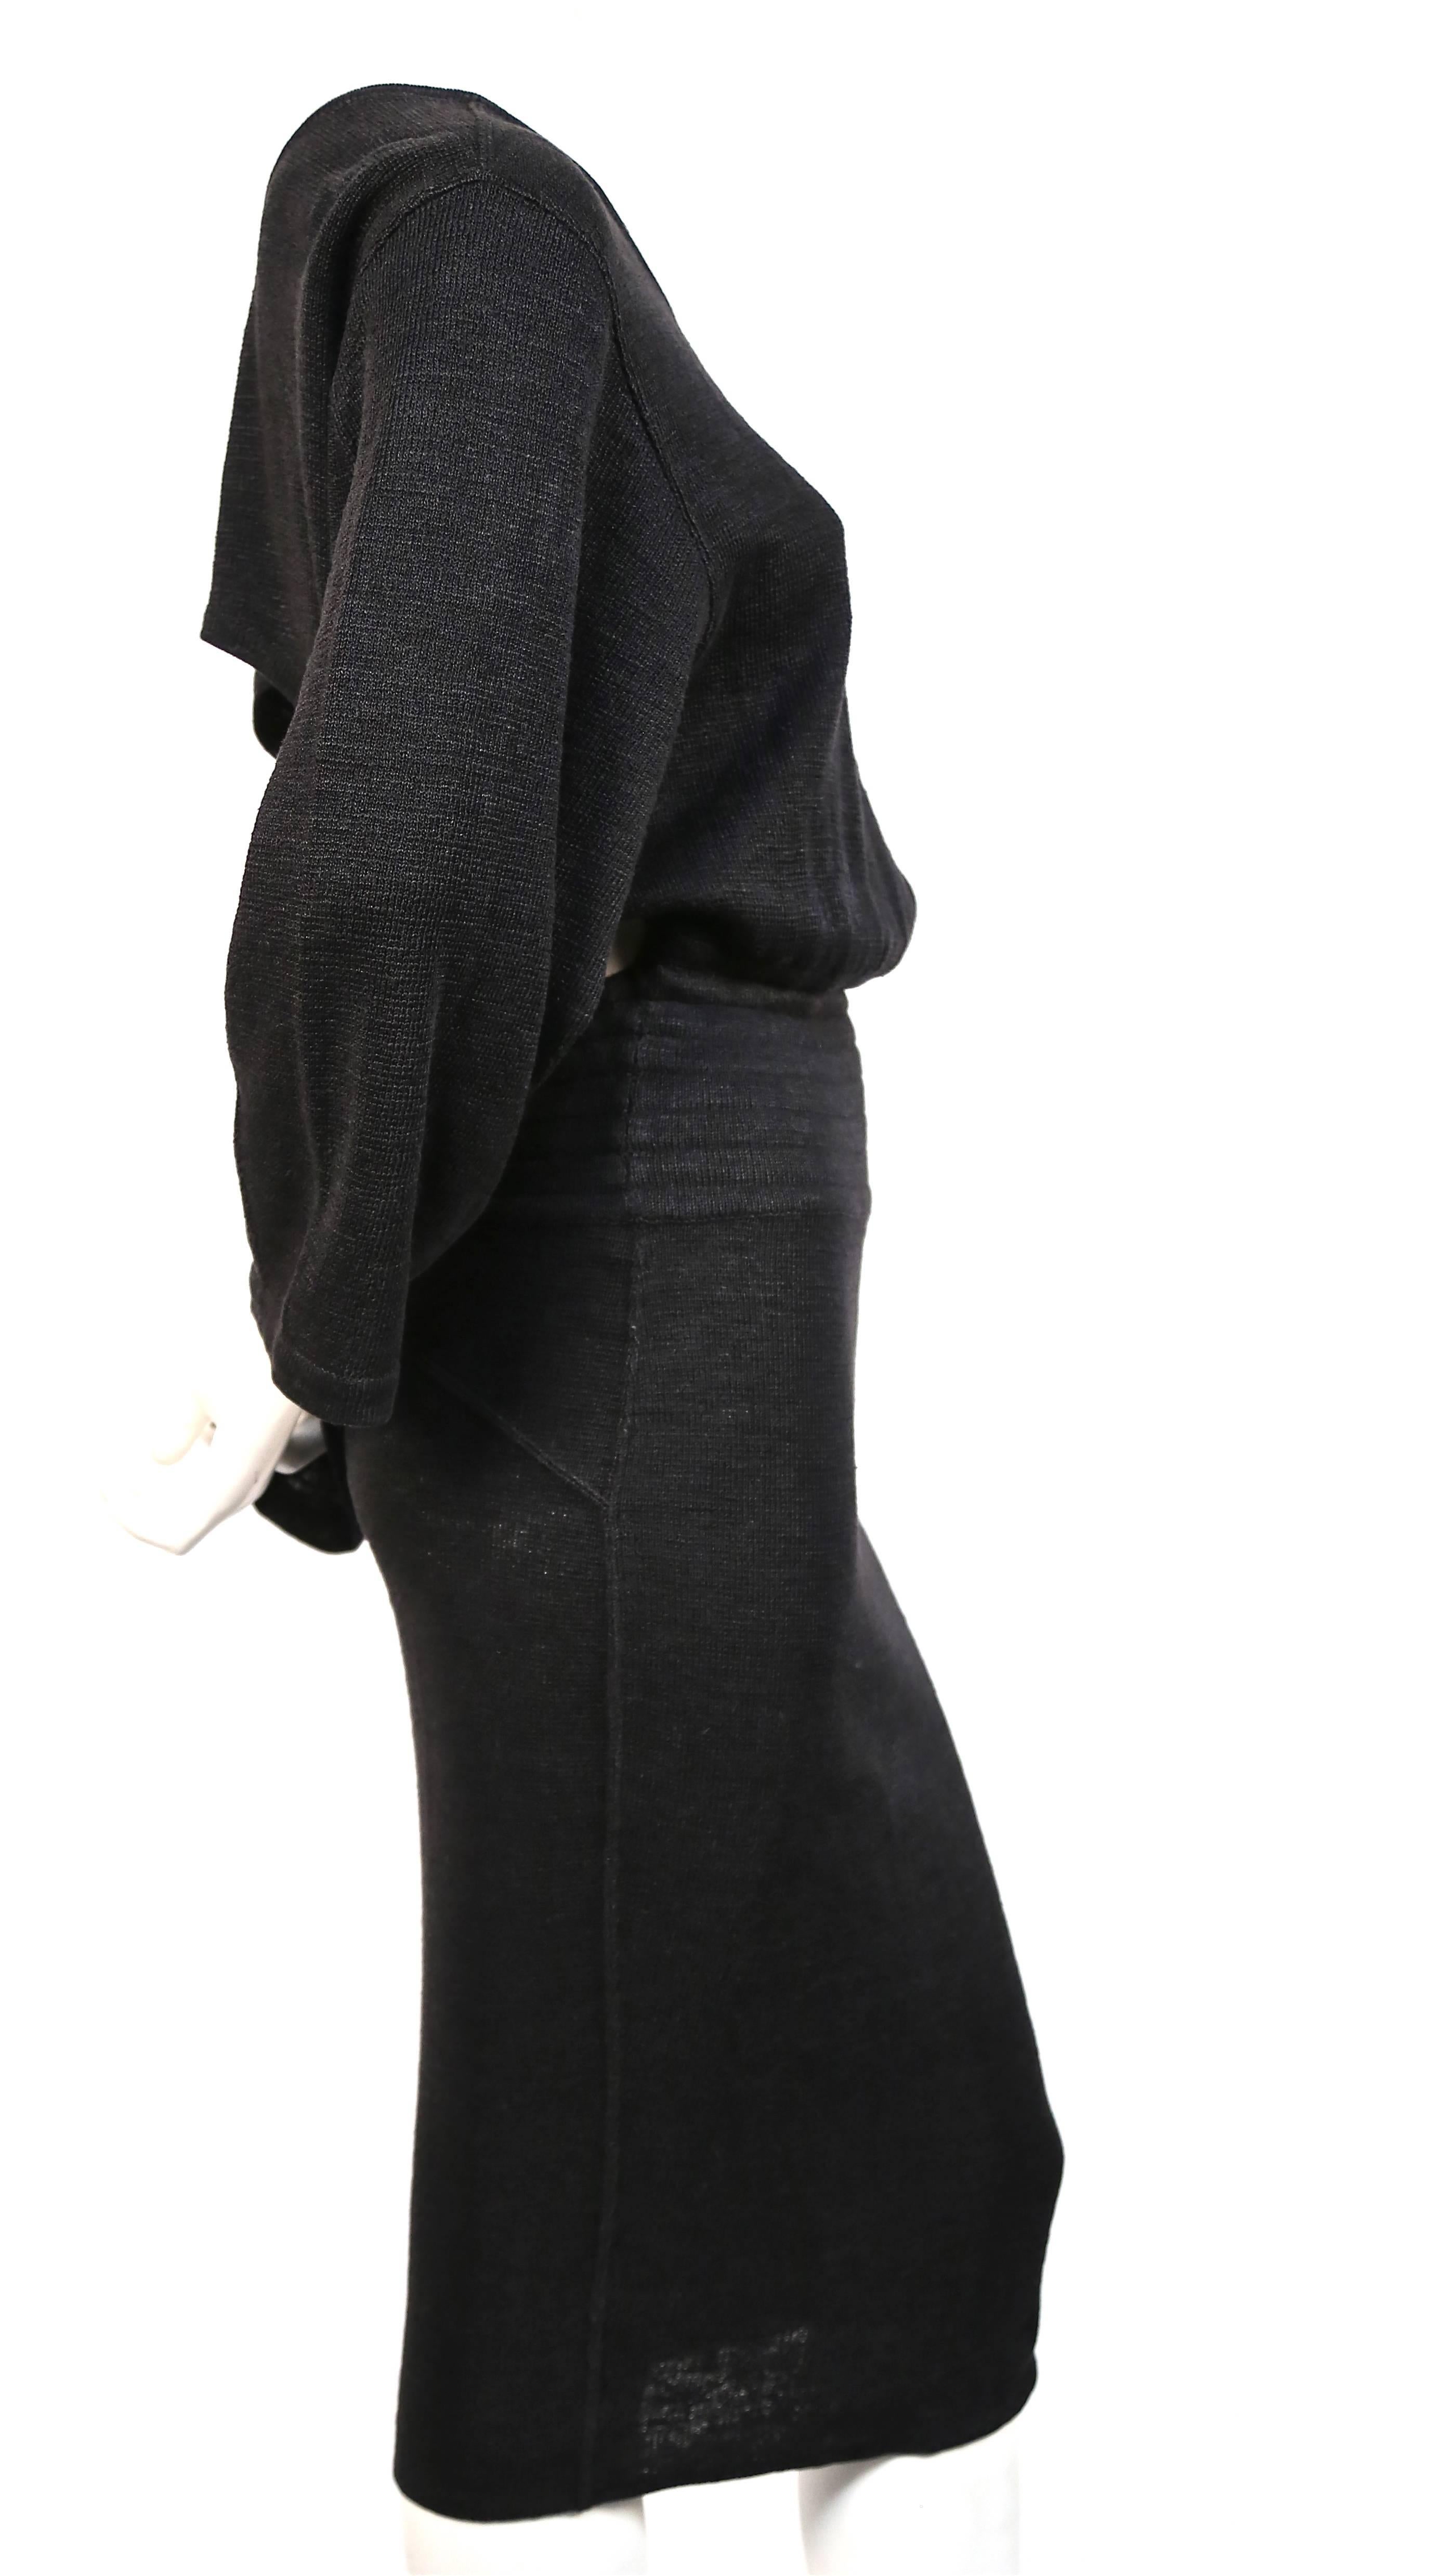 Very rare soft black linen dress with elasticized waist and cut out back from Azzedine Alaia dating to the 1980's. Size 'S'. Approximate measurements: drop shoulder 20